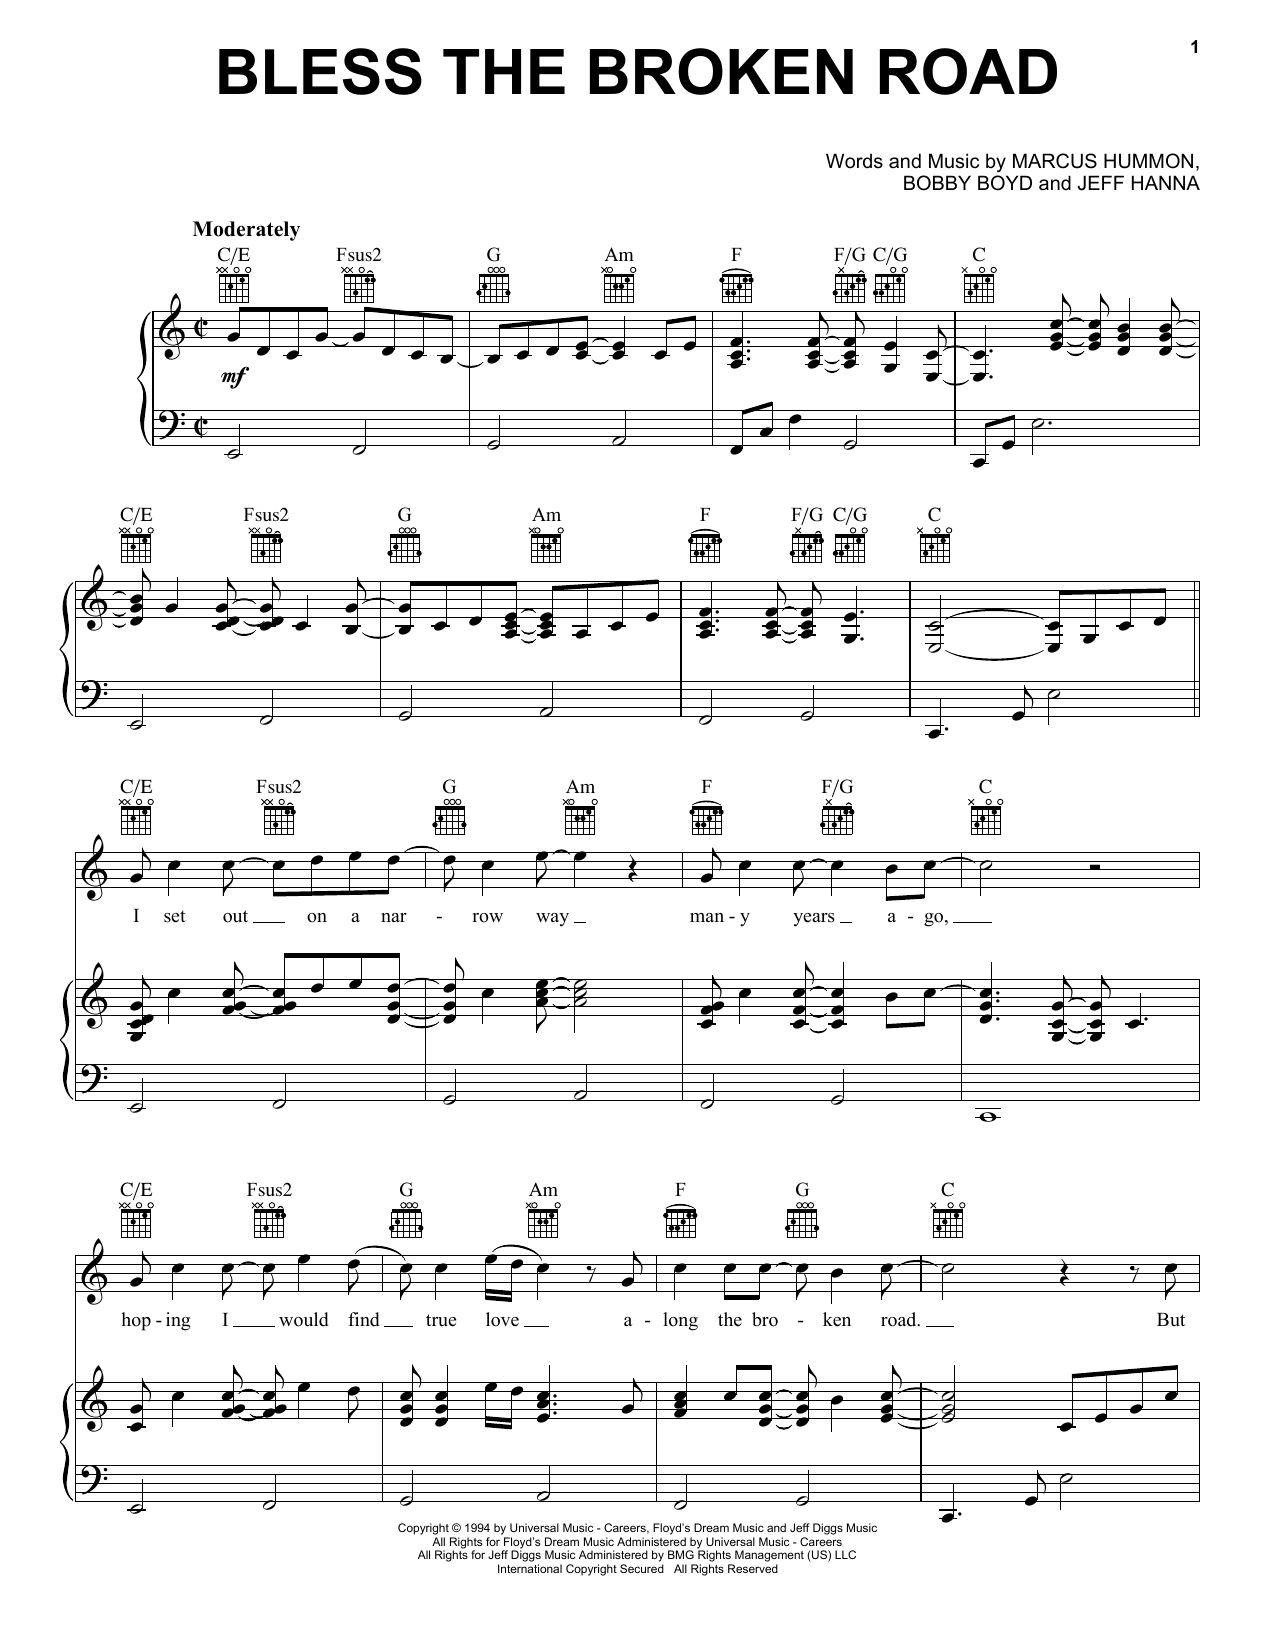 Rascal Flatts Bless The Broken Road sheet music notes and chords. Download Printable PDF.